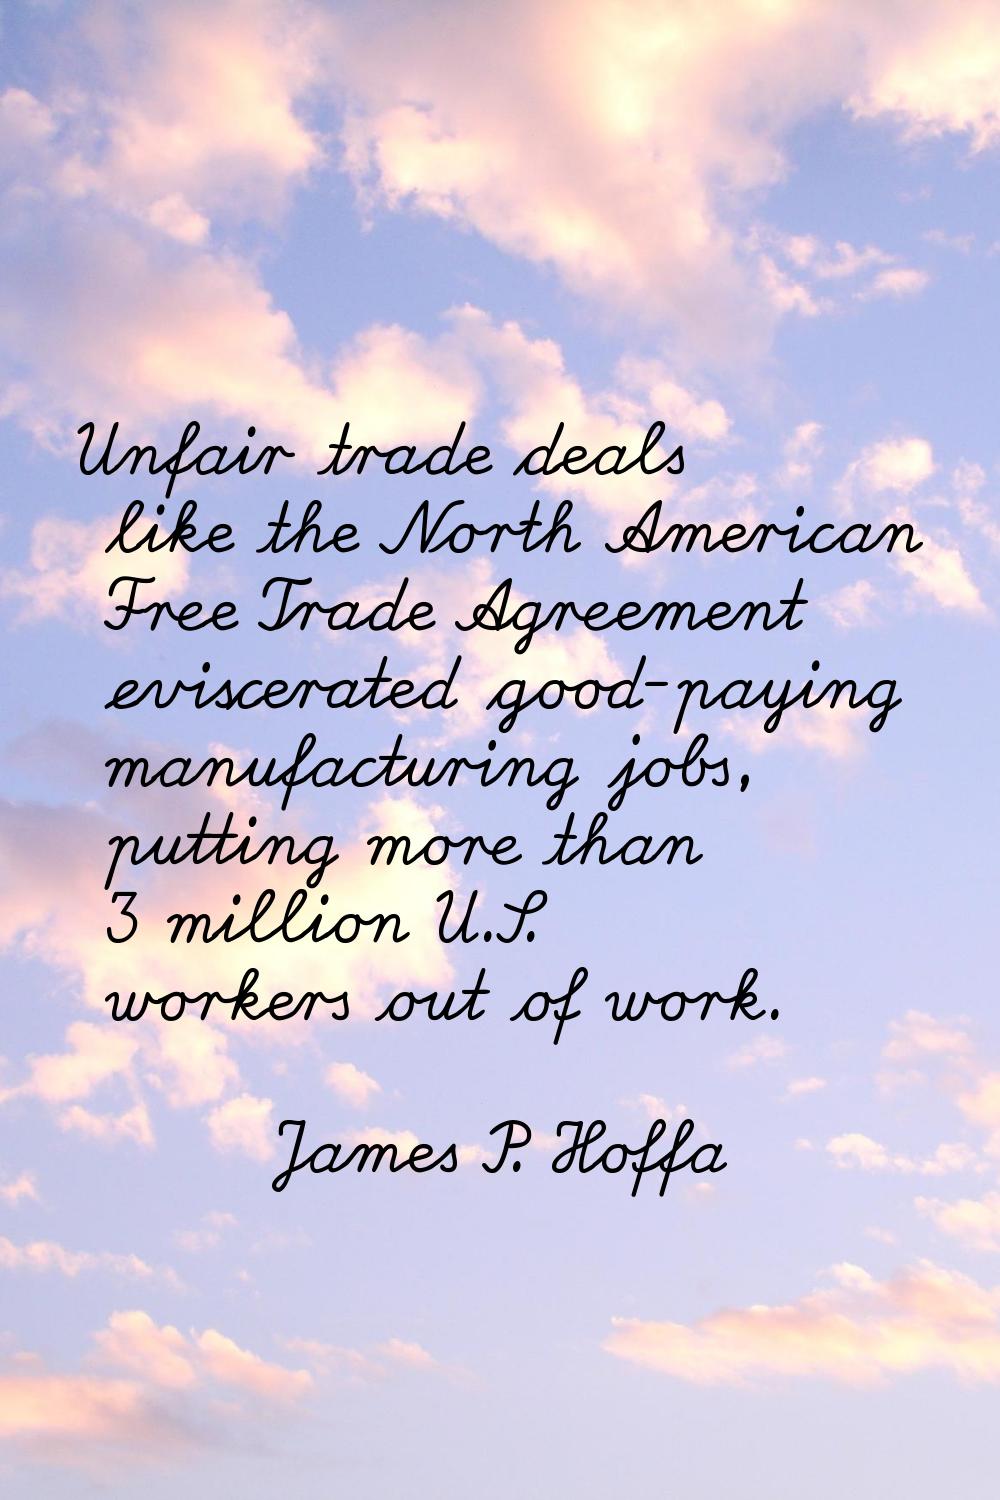 Unfair trade deals like the North American Free Trade Agreement eviscerated good-paying manufacturi